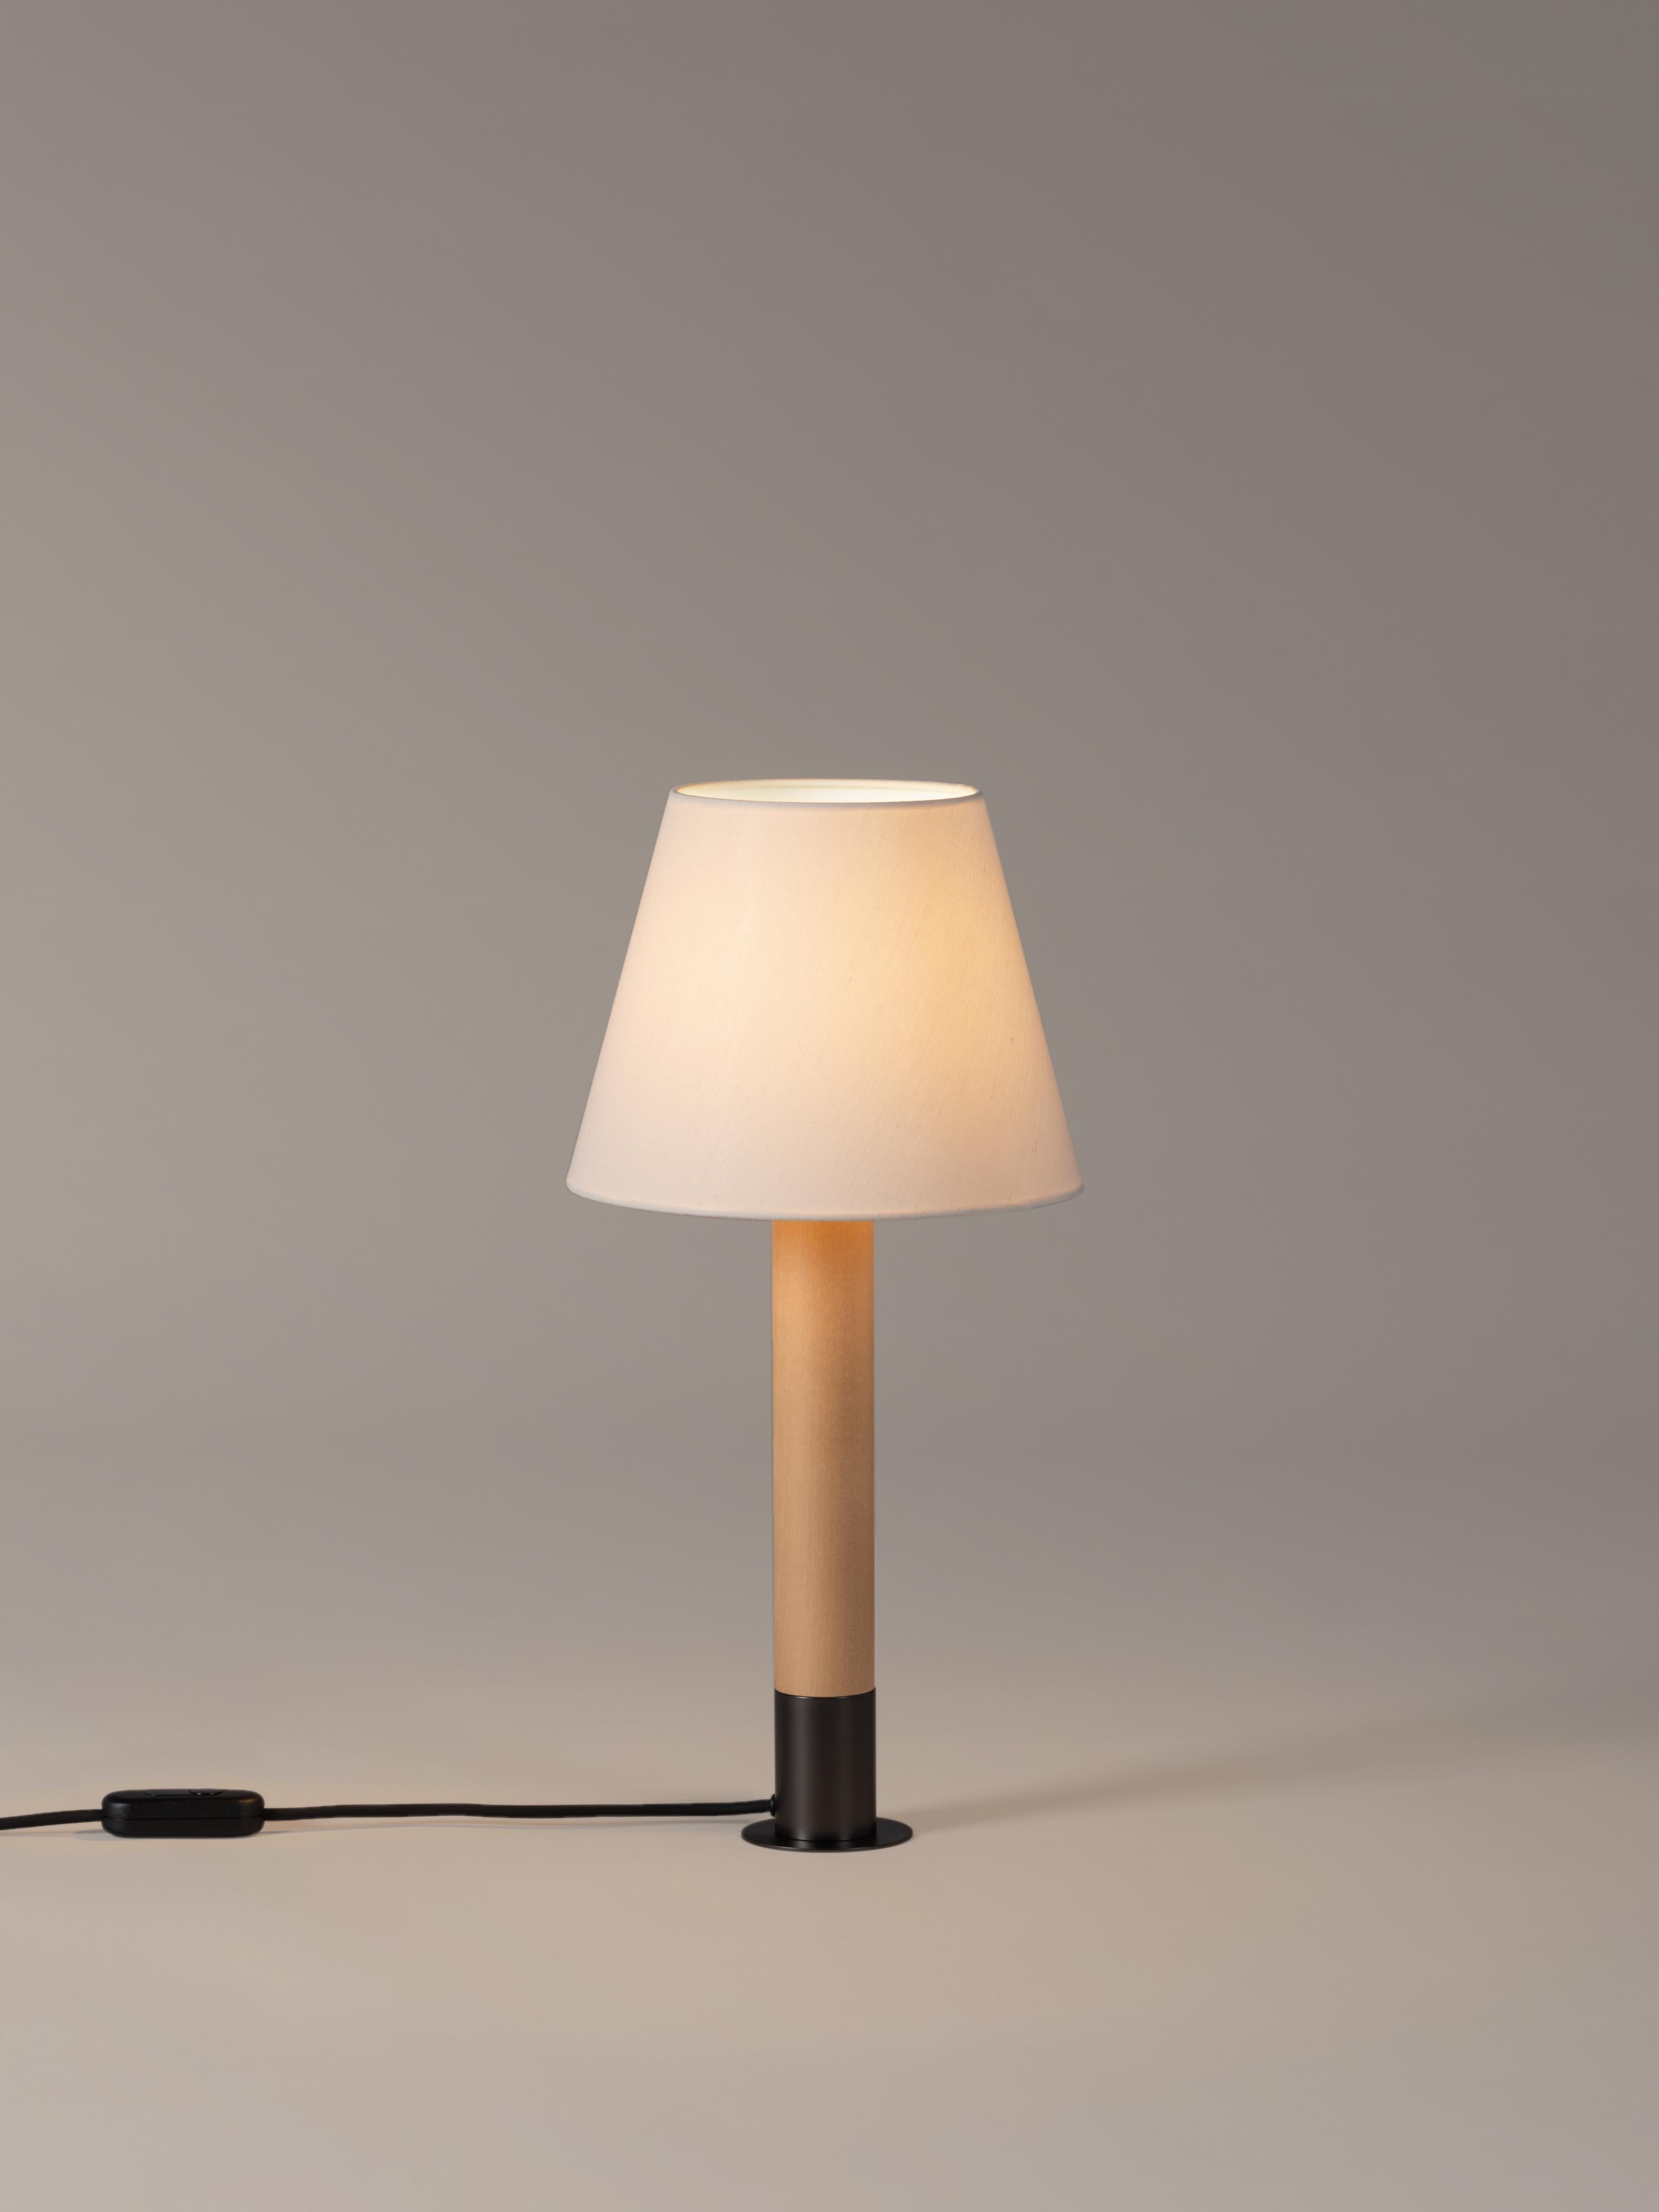 Bronze and white Básica M1 table lamp by Santiago Roqueta, Santa & Cole
Dimensions: D 25 x H 52 cm
Materials: Bronze, birch wood, linen.
Available in other shade colors and with or without the stabilizing disc.
Available in nickel or